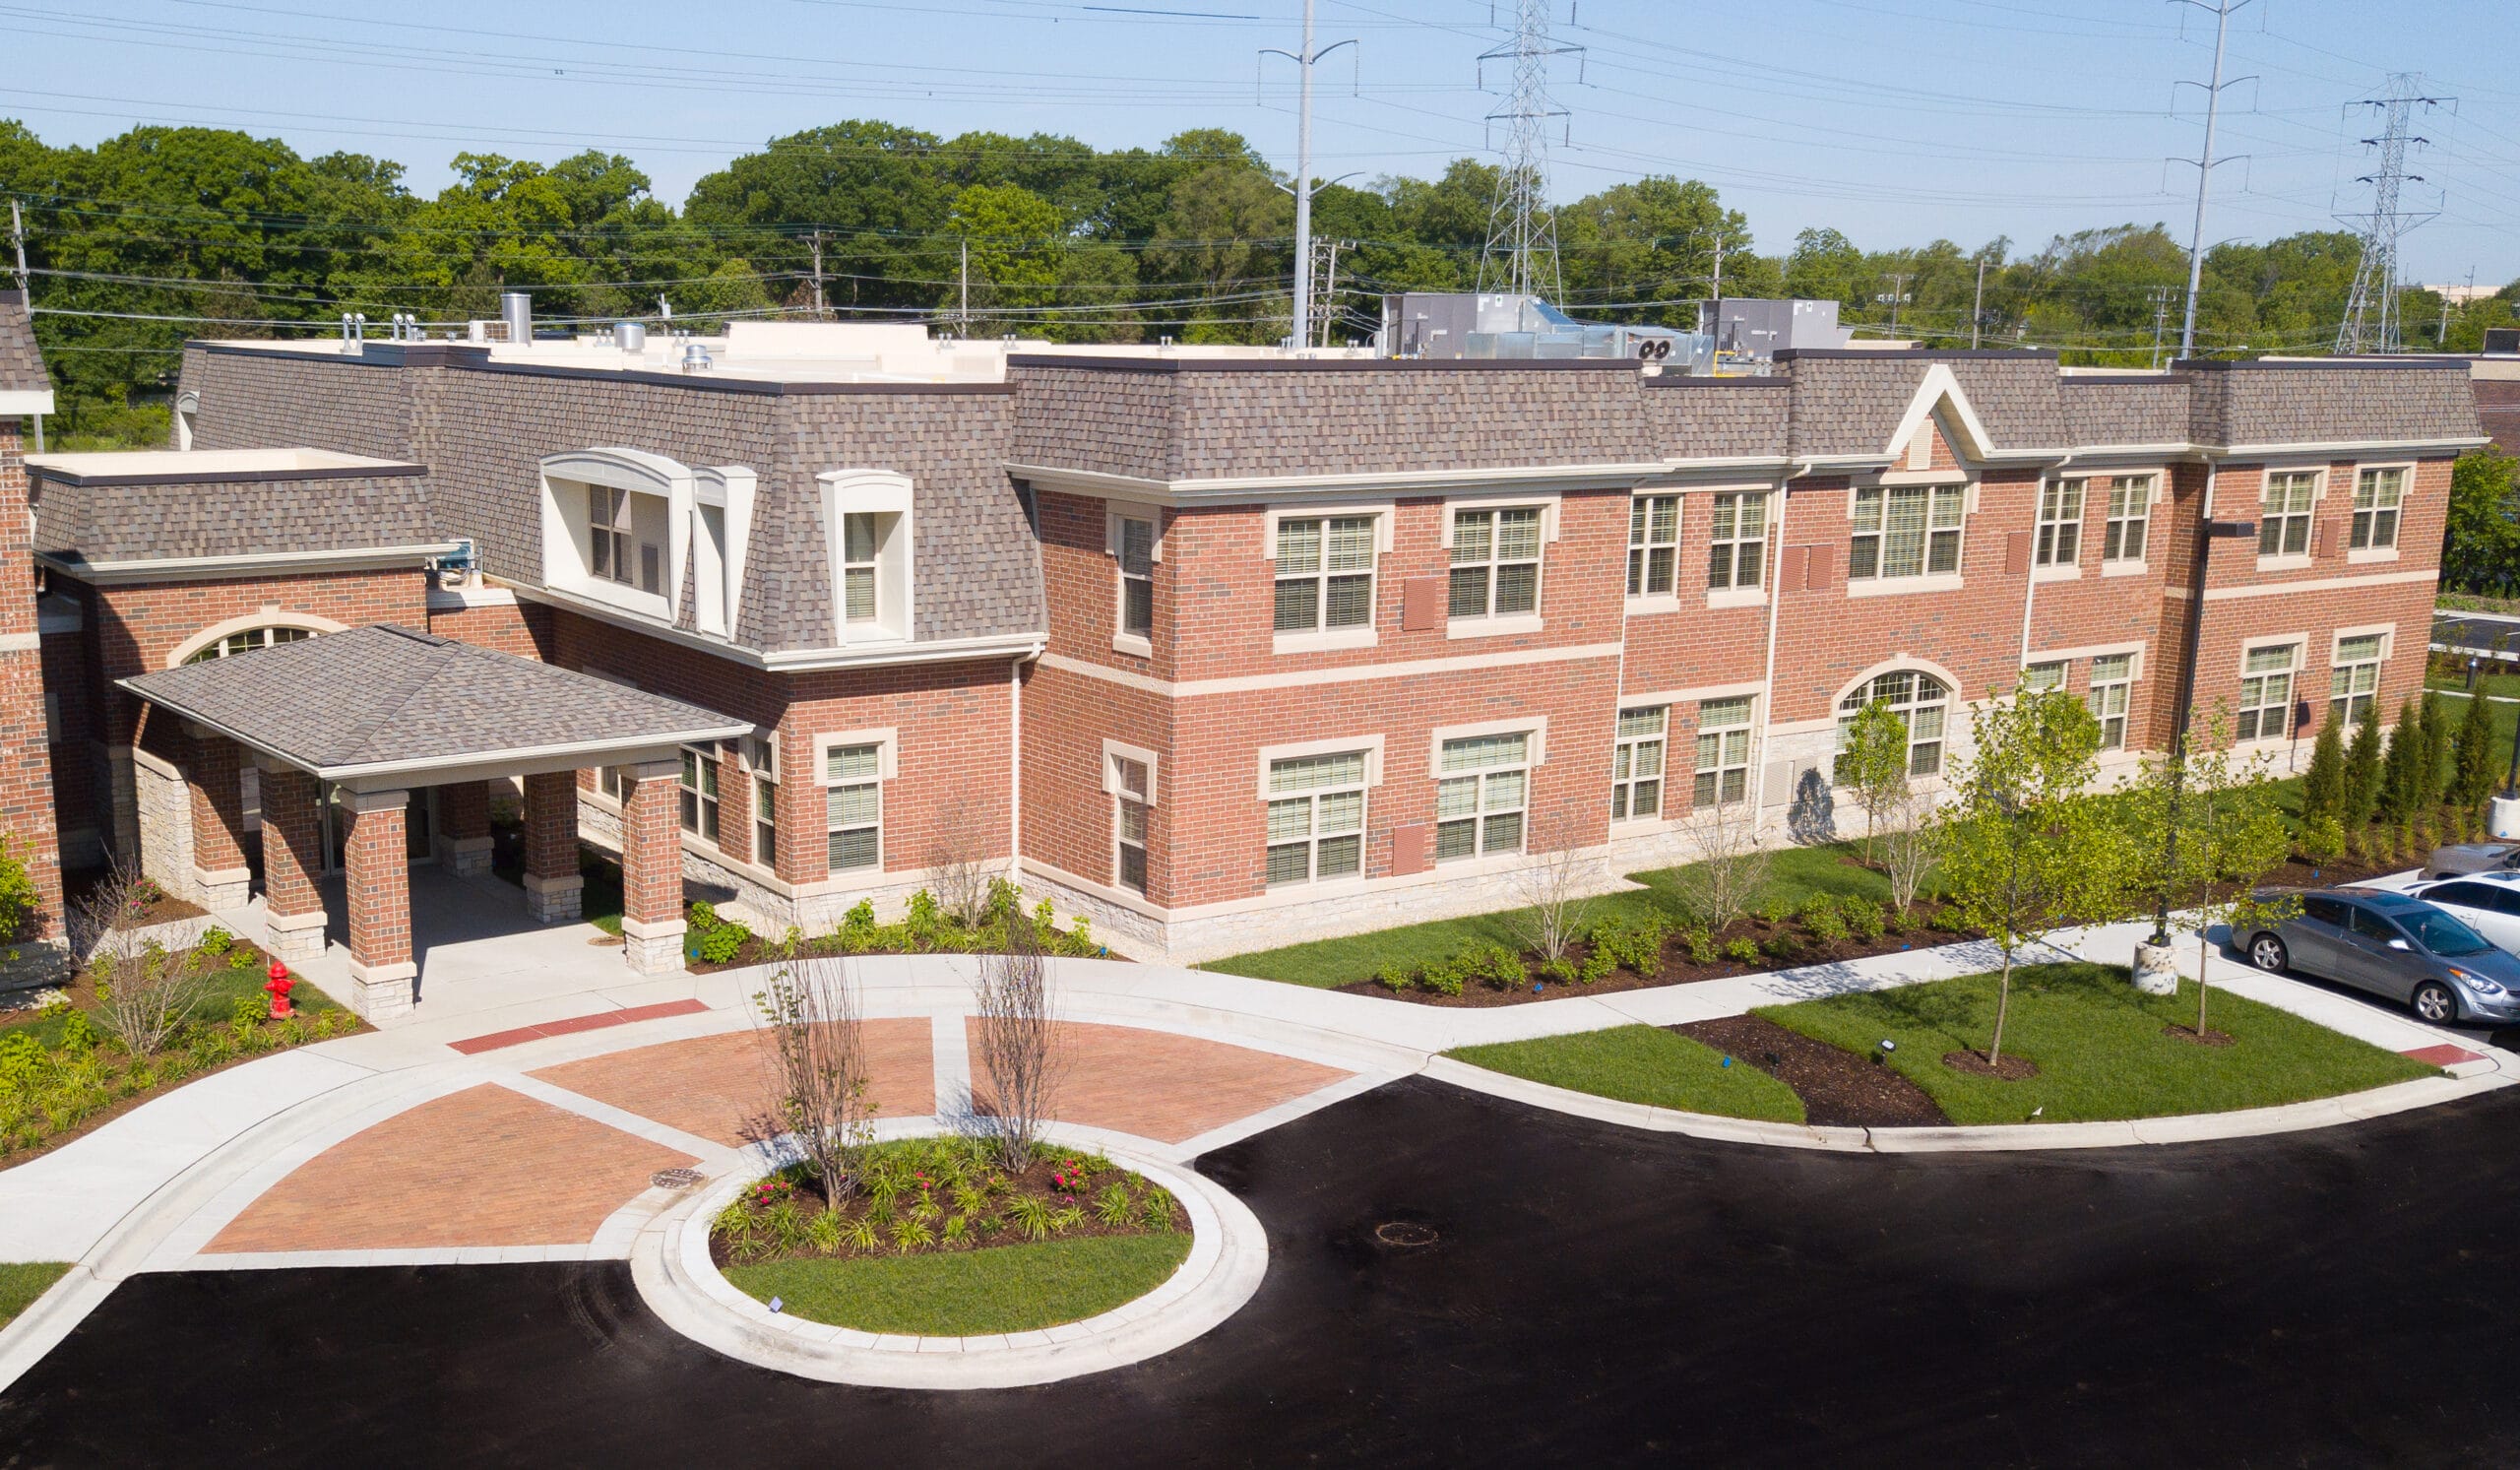 Chicago-Area Assisted Living Community Gets New Building